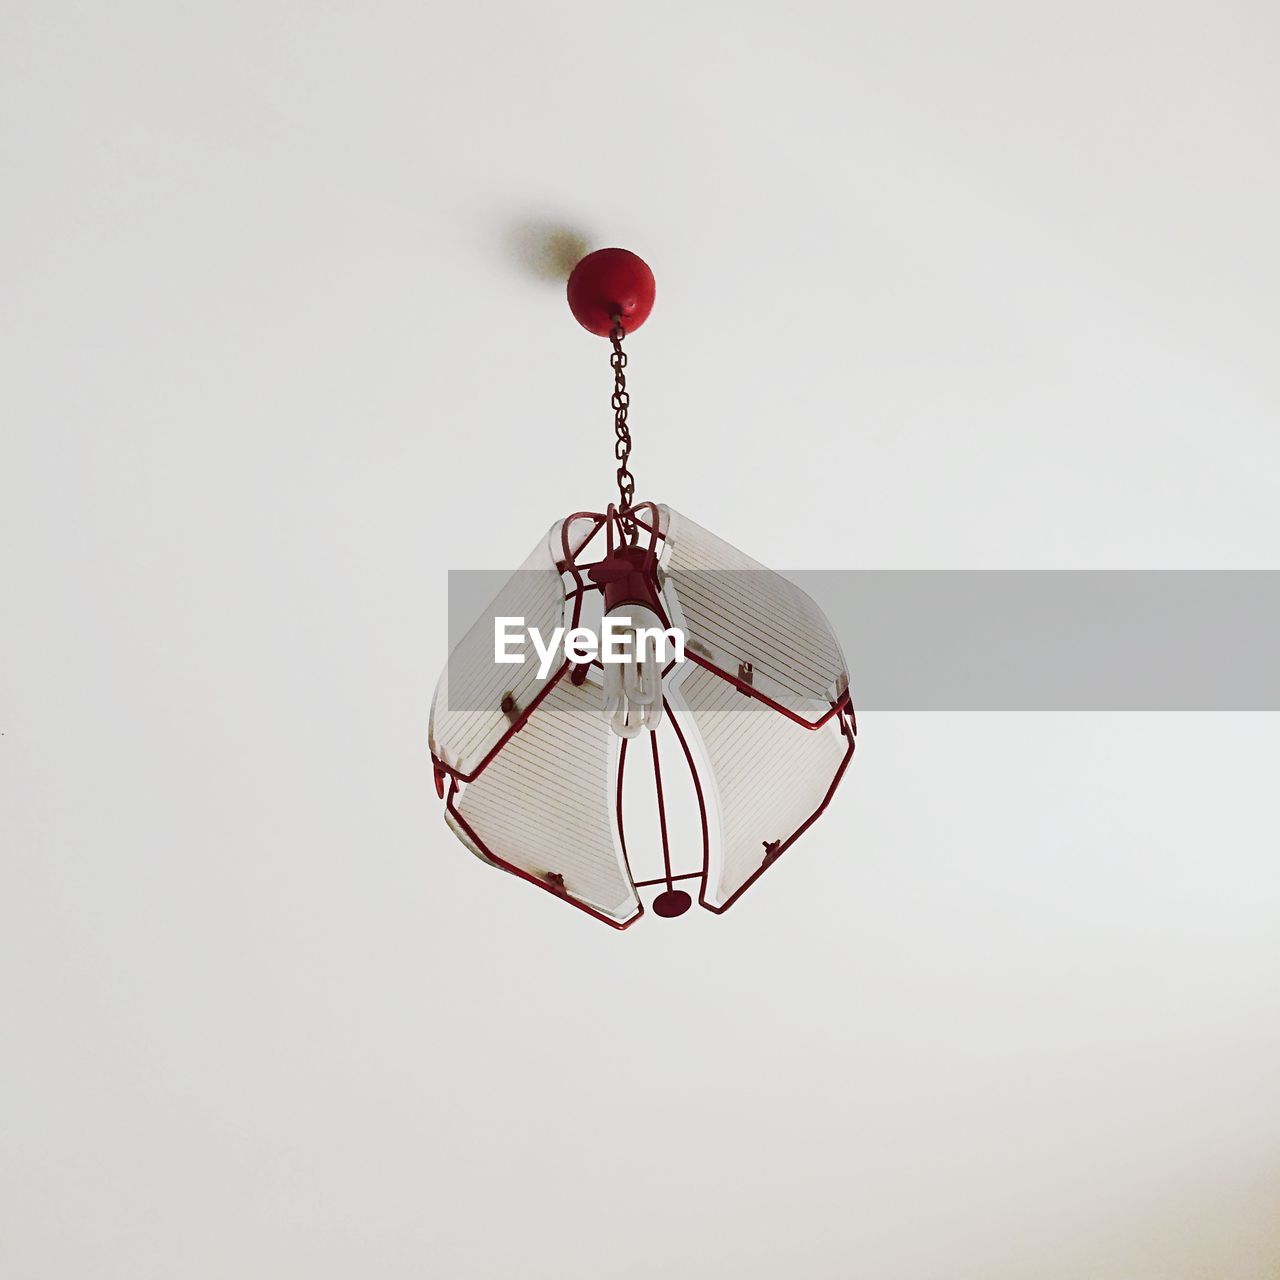 Modern lamp hanging from white ceiling